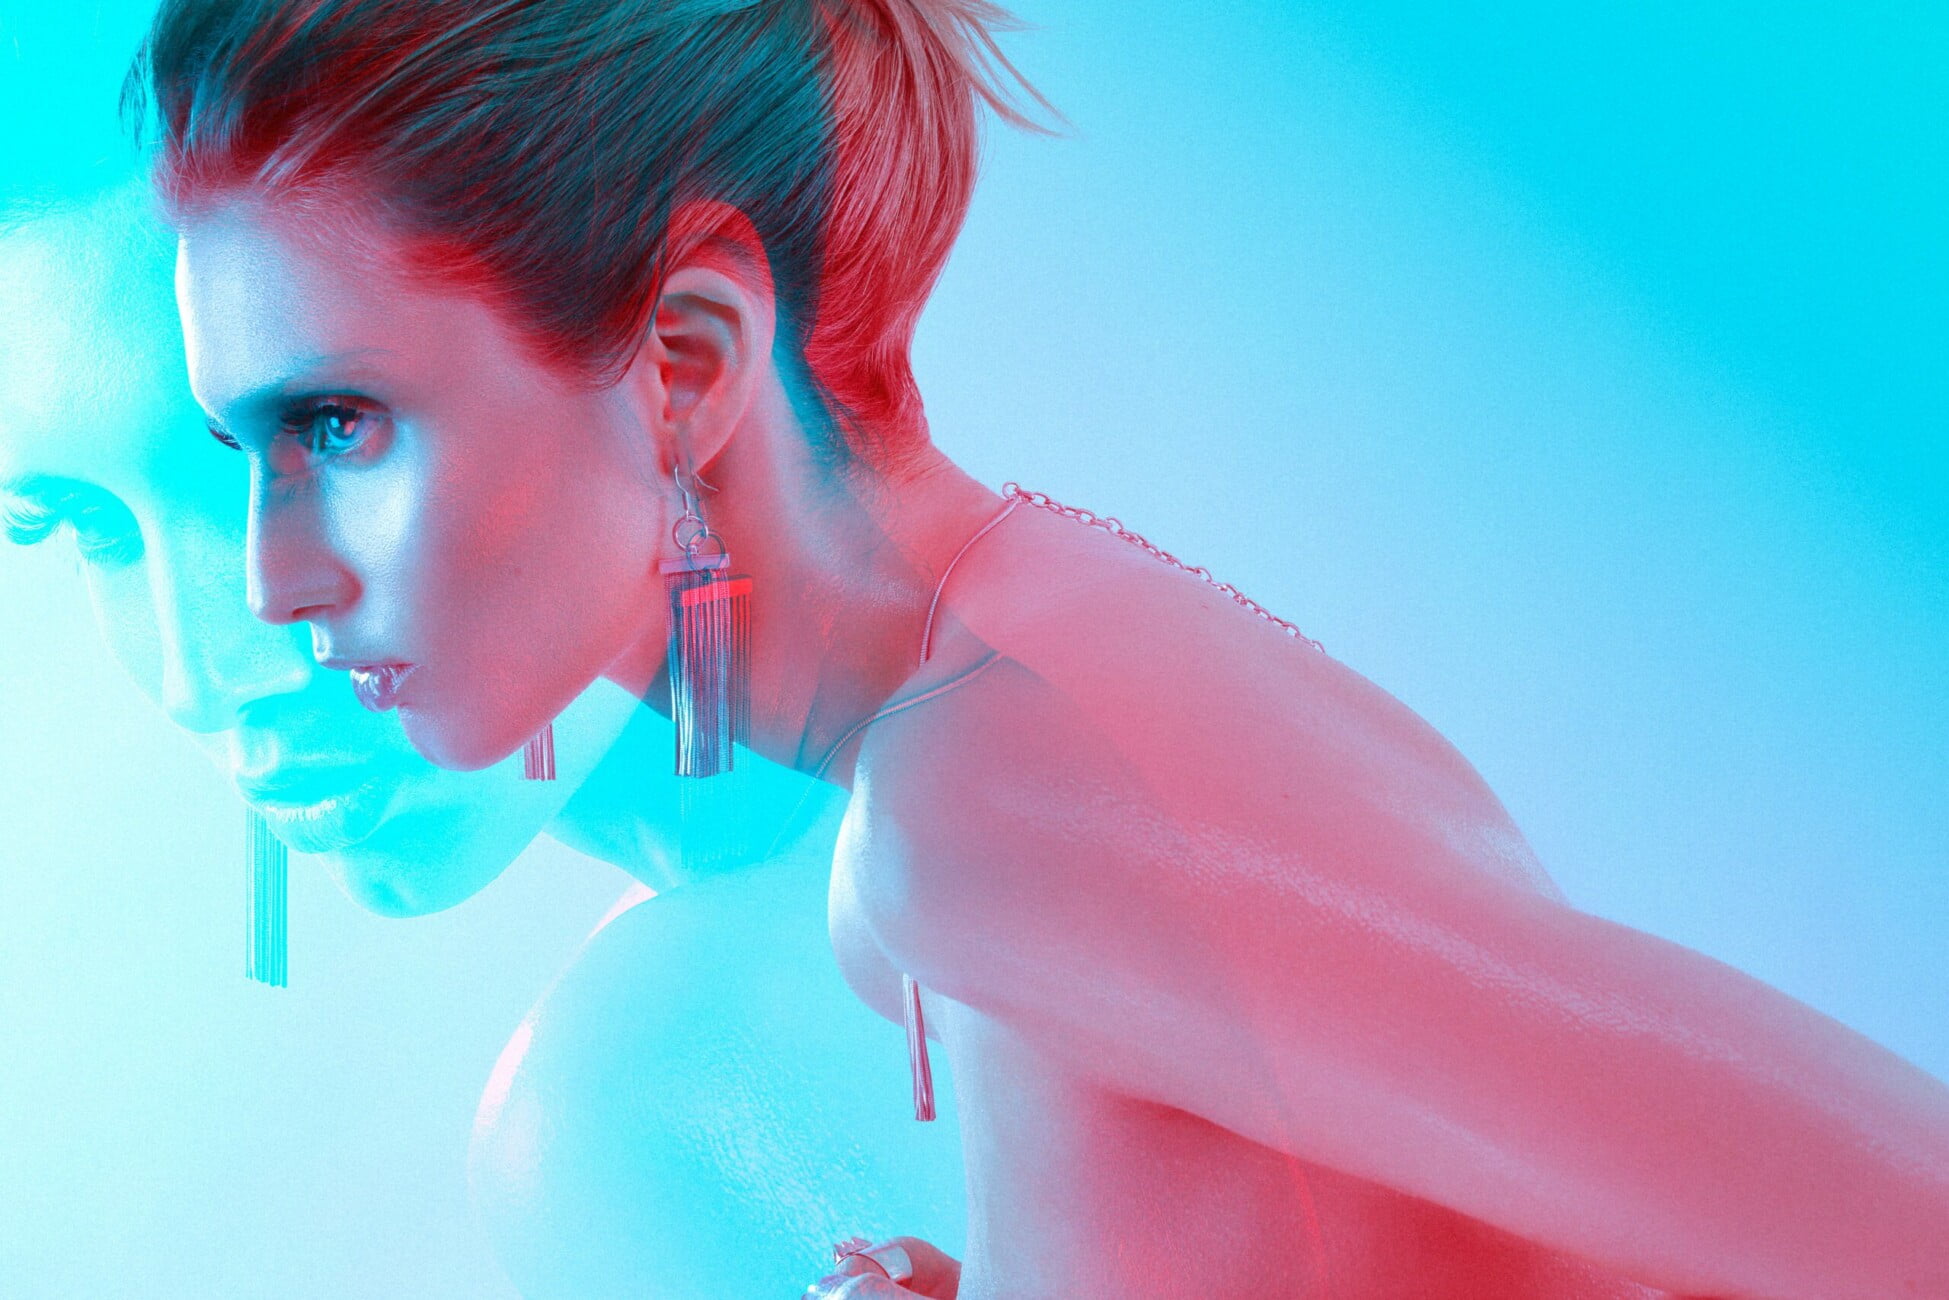 Dynamic composition featuring model Adeline Petit's nudity and exquisite jewelry, captured in an artistic electric blue and red image by photographer Etienne Delorme for Faust Magazine.